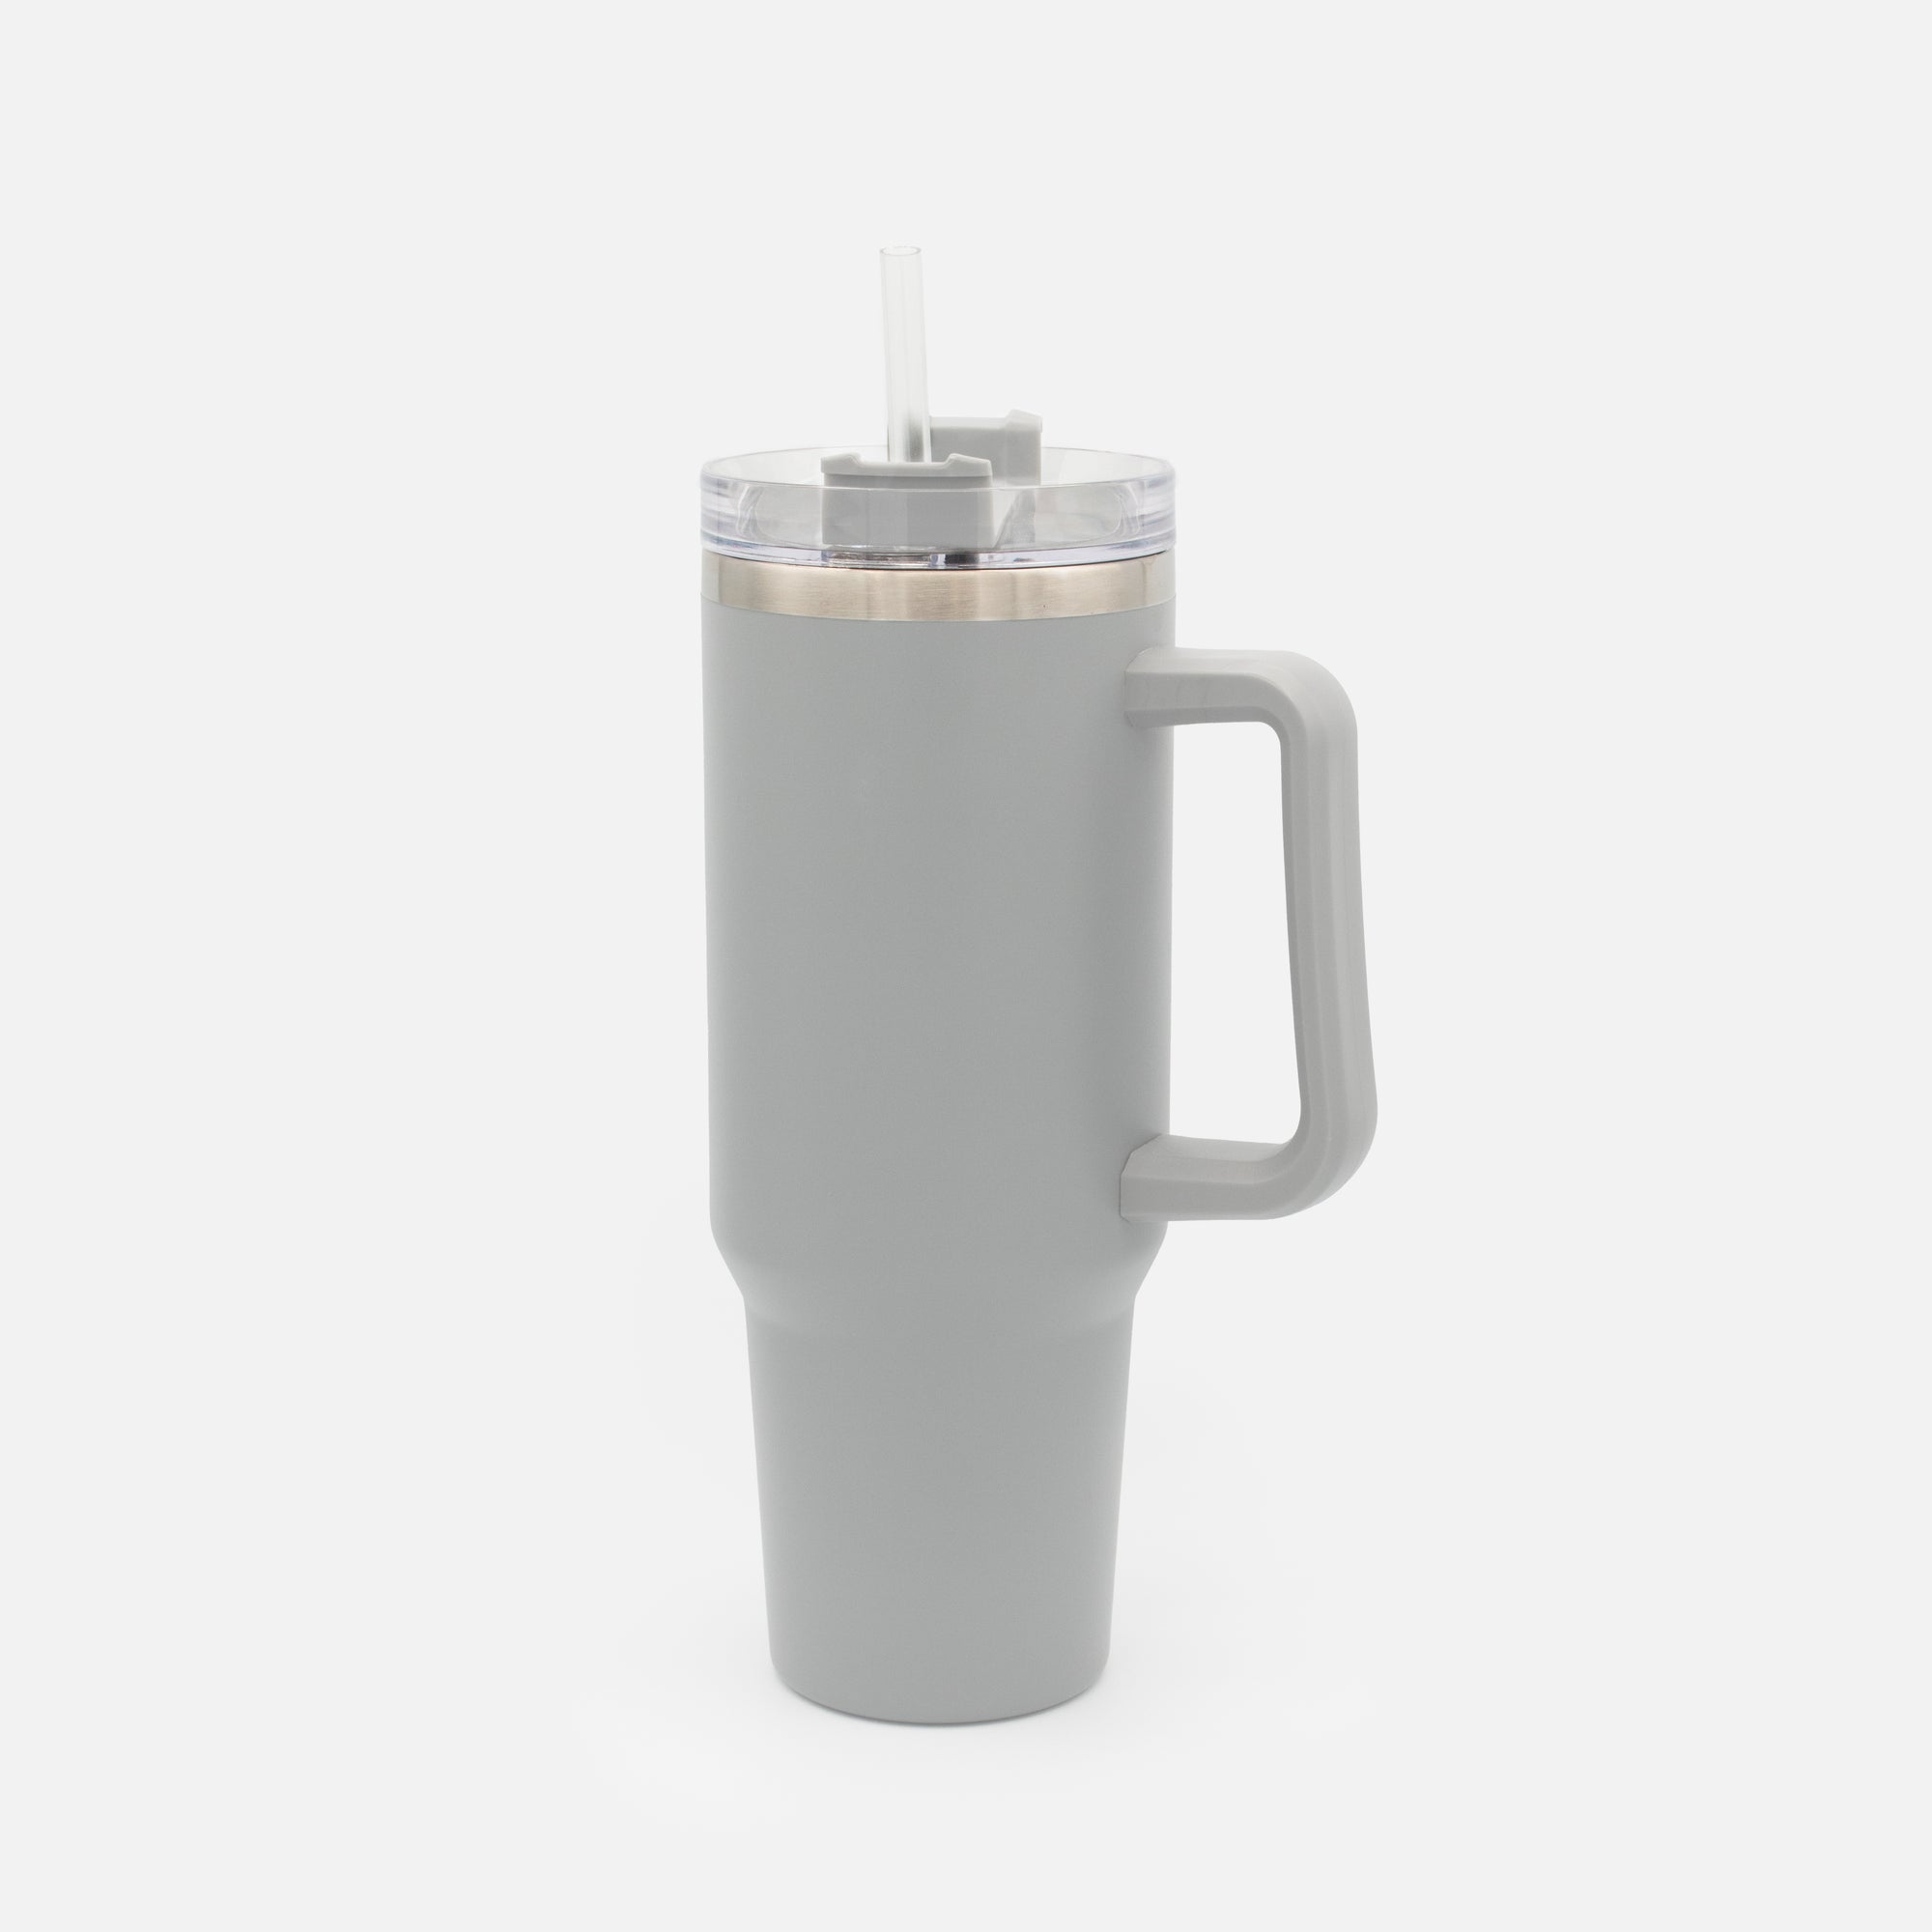 Large Pale Gray Stainless Steel Travel Mug with Straw